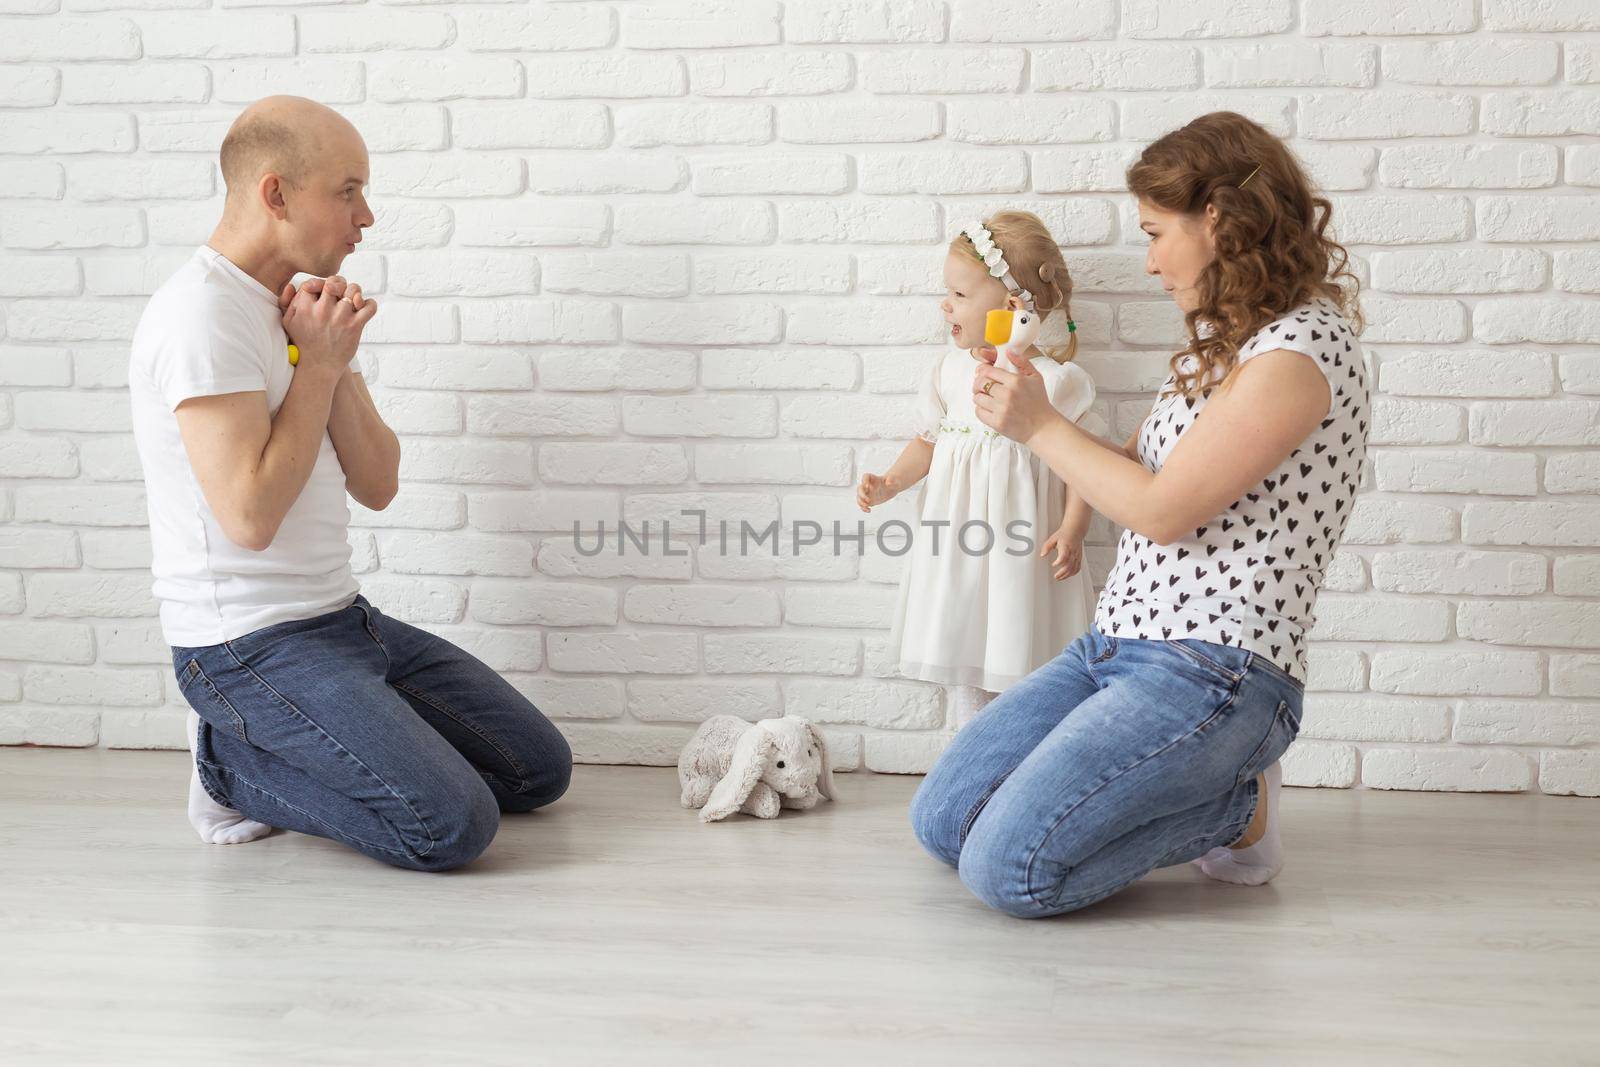 Baby child with hearing aids and cochlear implants plays with parents on floor. Deaf and rehabilitation concept by Satura86